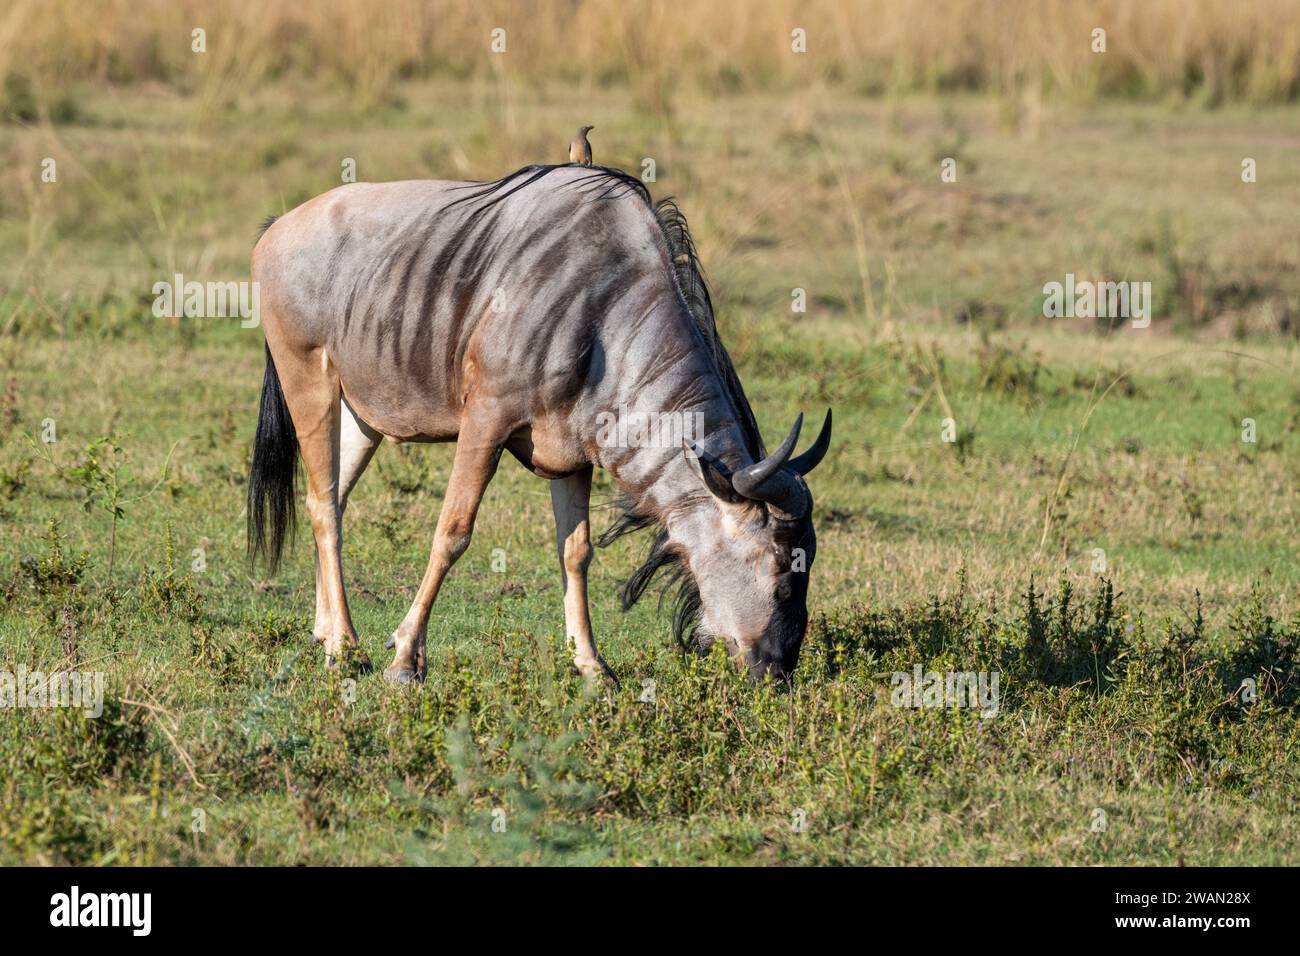 Africa, Zambia, South Luangwa. Cookson's wildebeest (Connochaetes taurinus cooksoni) subspecies of the blue wildebeest. Endemic to southern Africa. Stock Photo